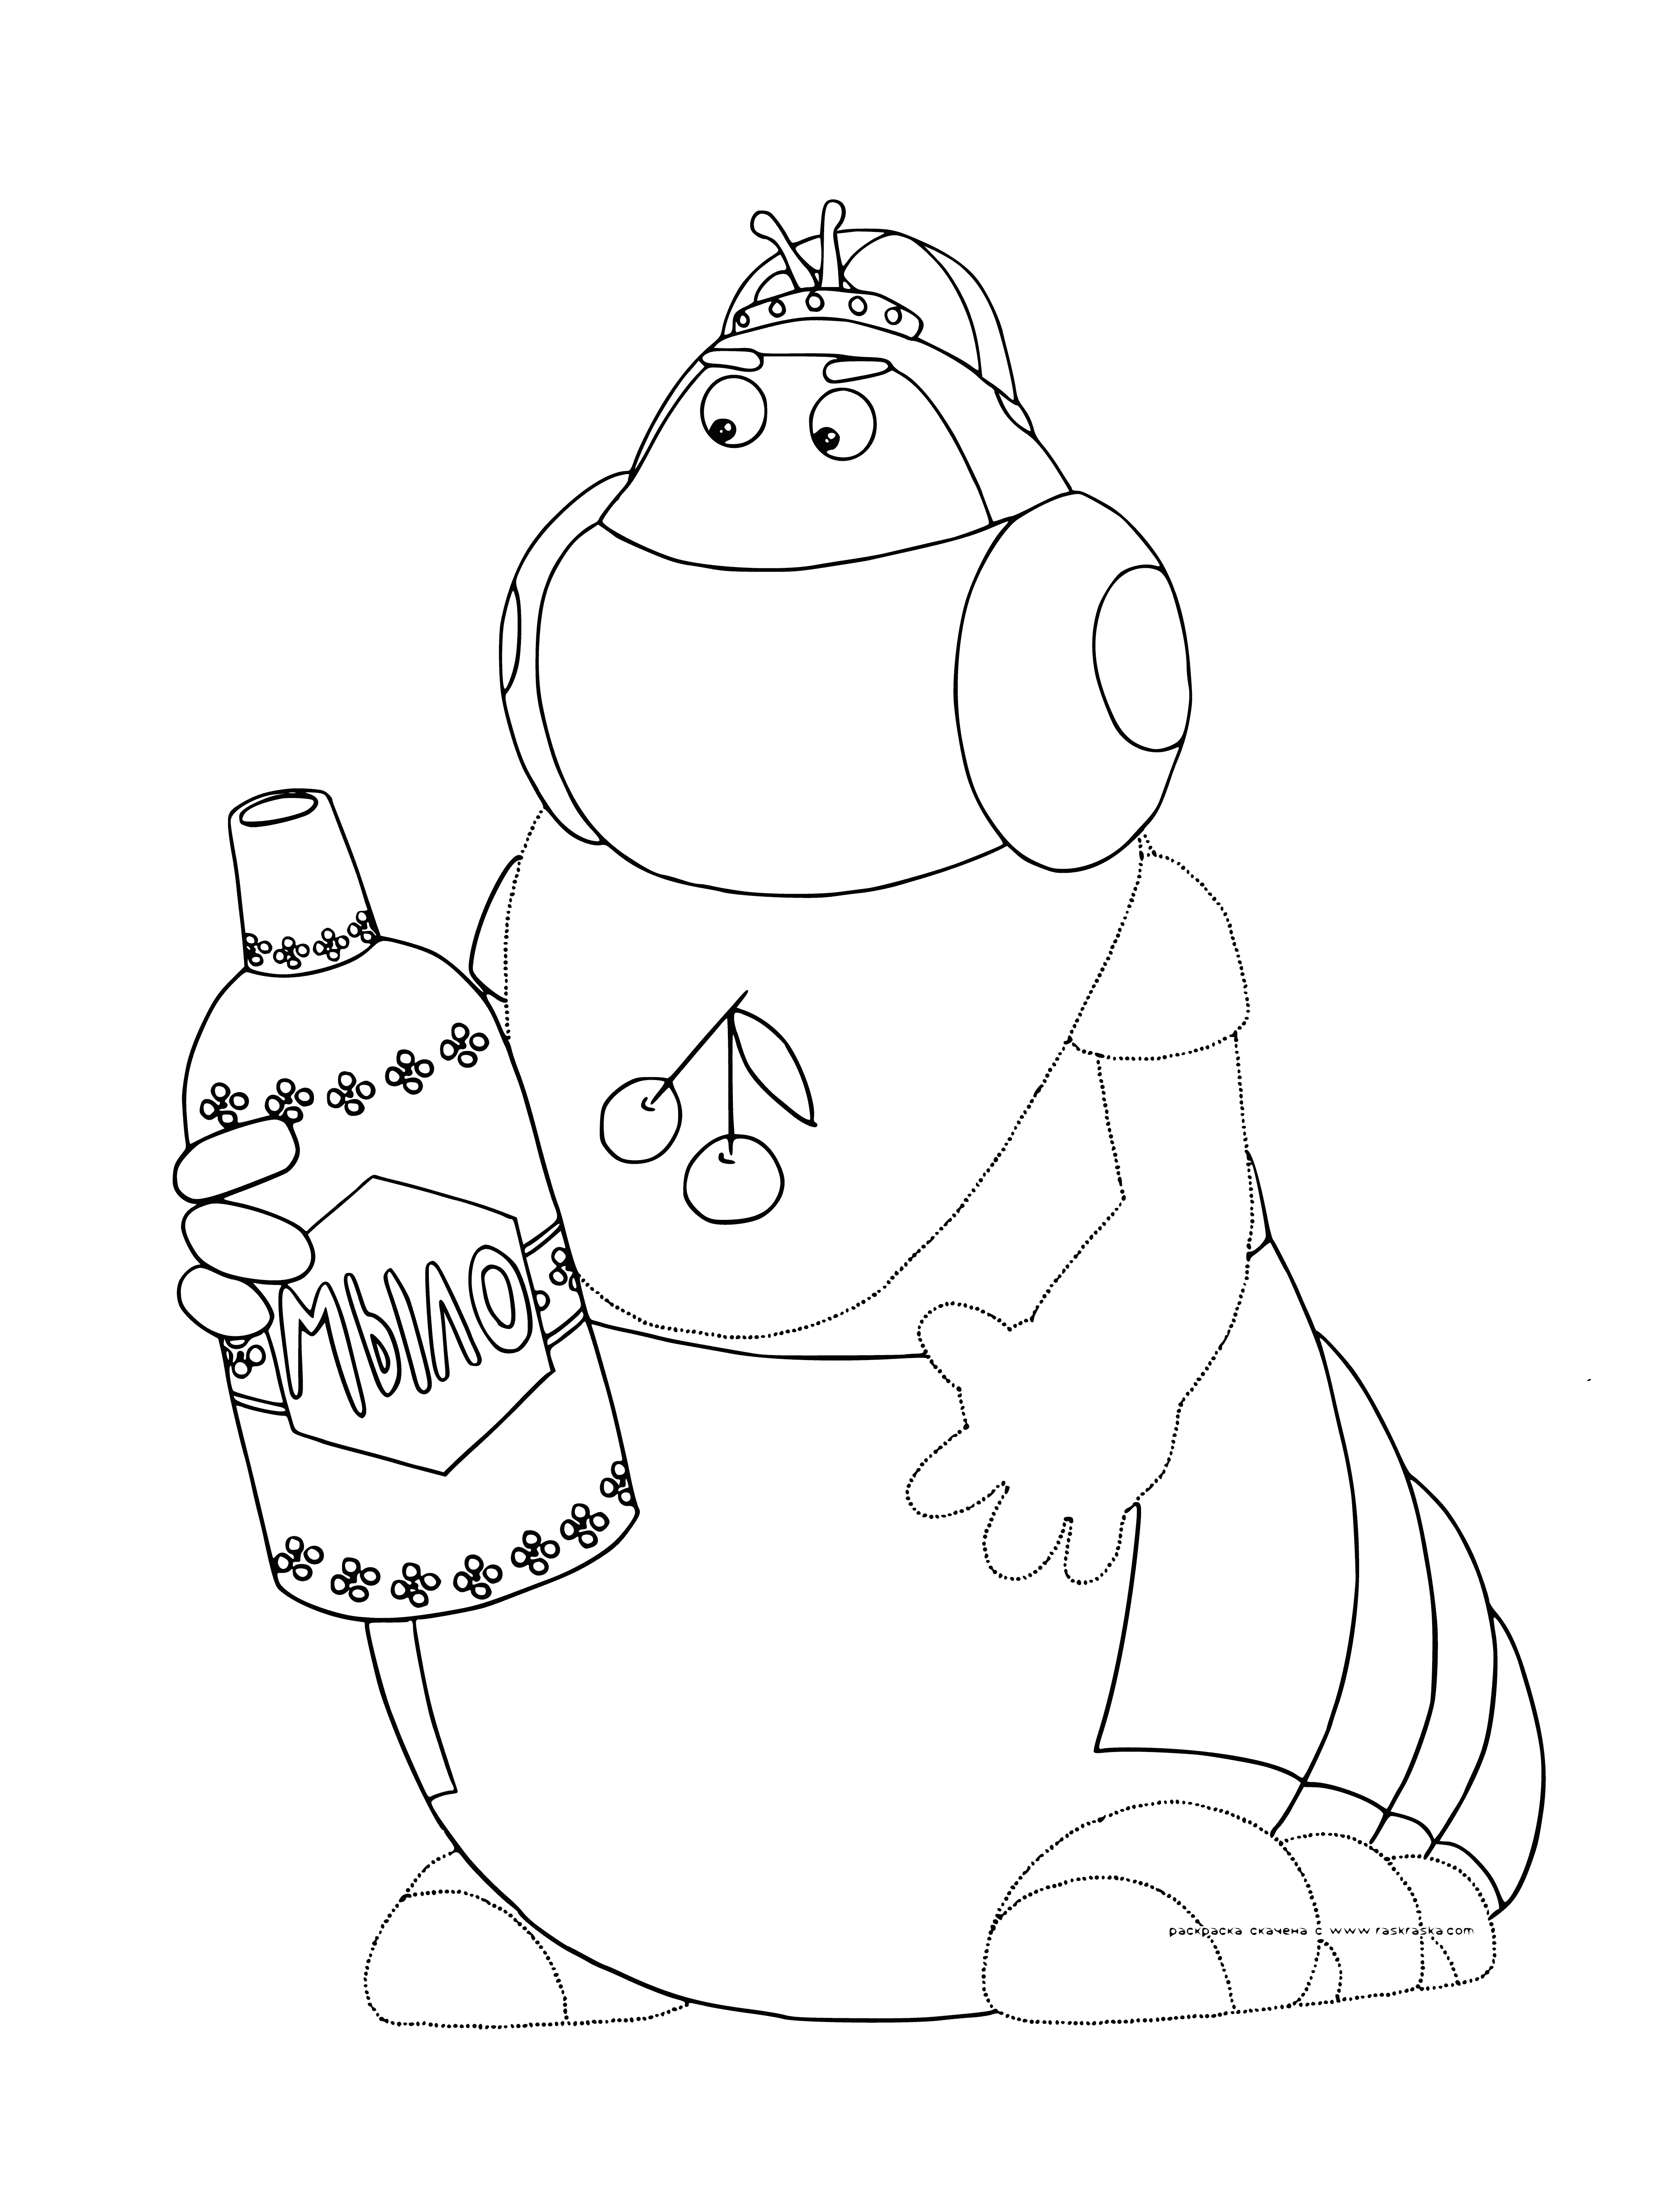 coloring page: Creature Luntik & Whoopsen standing on platform with blue sky & clouds. Luntik mostly blue, Whoopsen all yellow with soap bubbles.